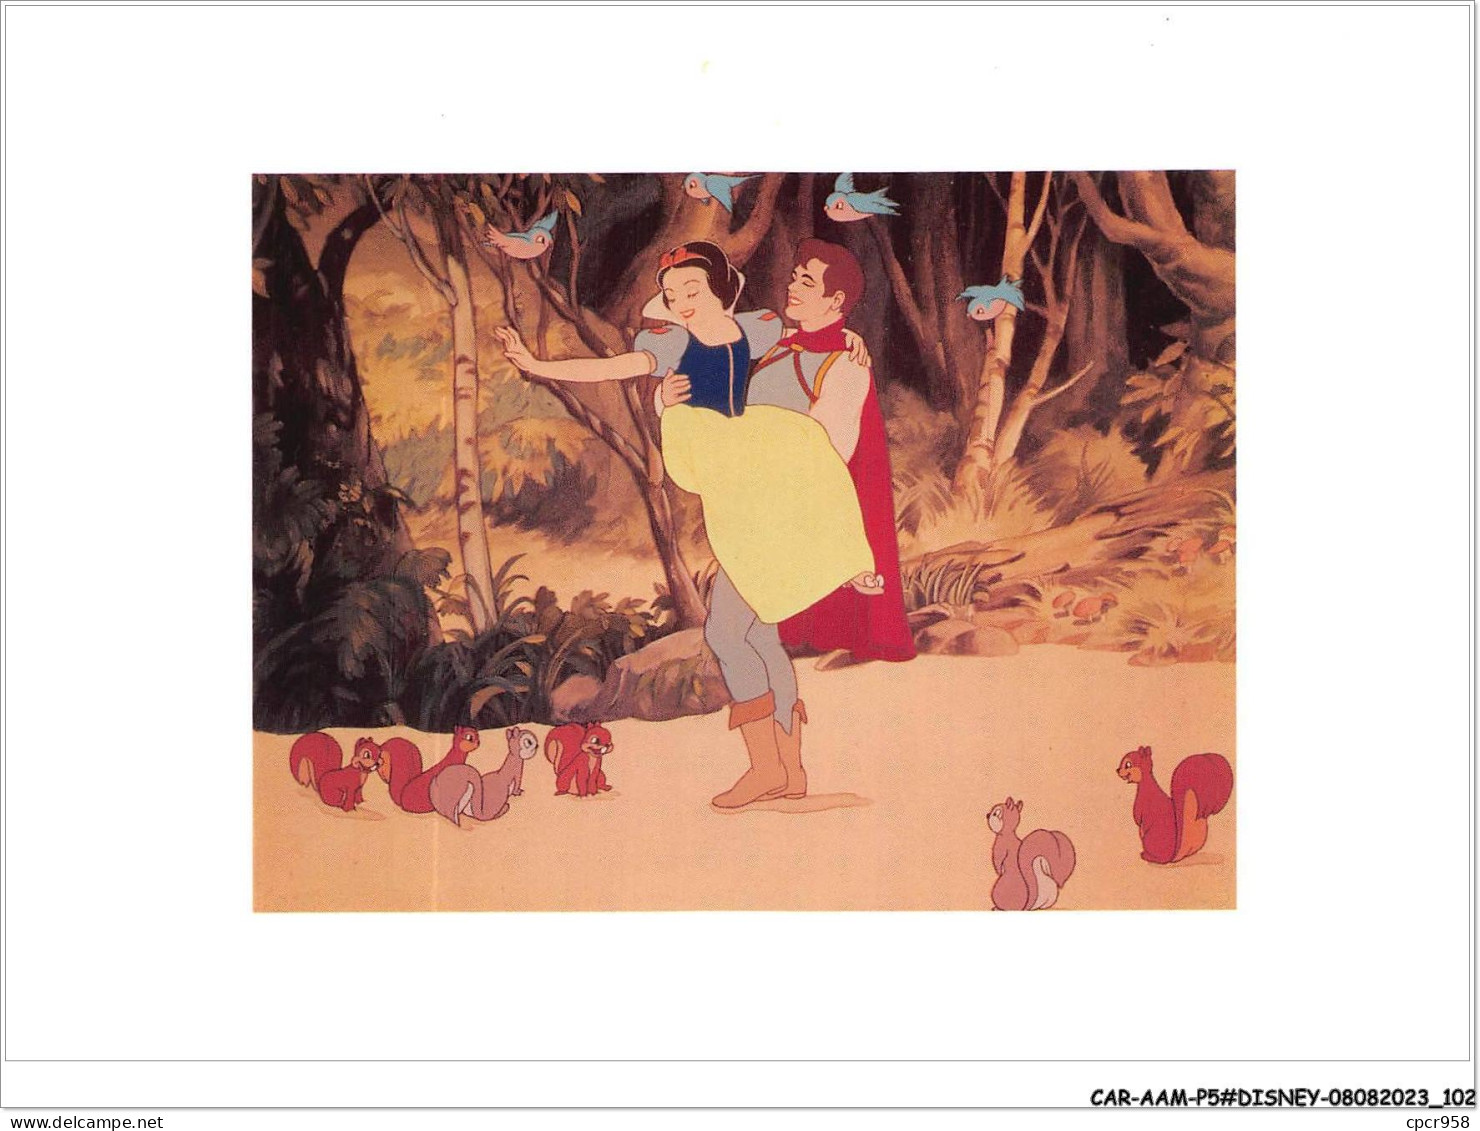 CAR-AAMP5-DISNEY-0459 - Blanche-Neige - Happy Ever After - Snow White And The Seven Dwarfs  - Disneyland